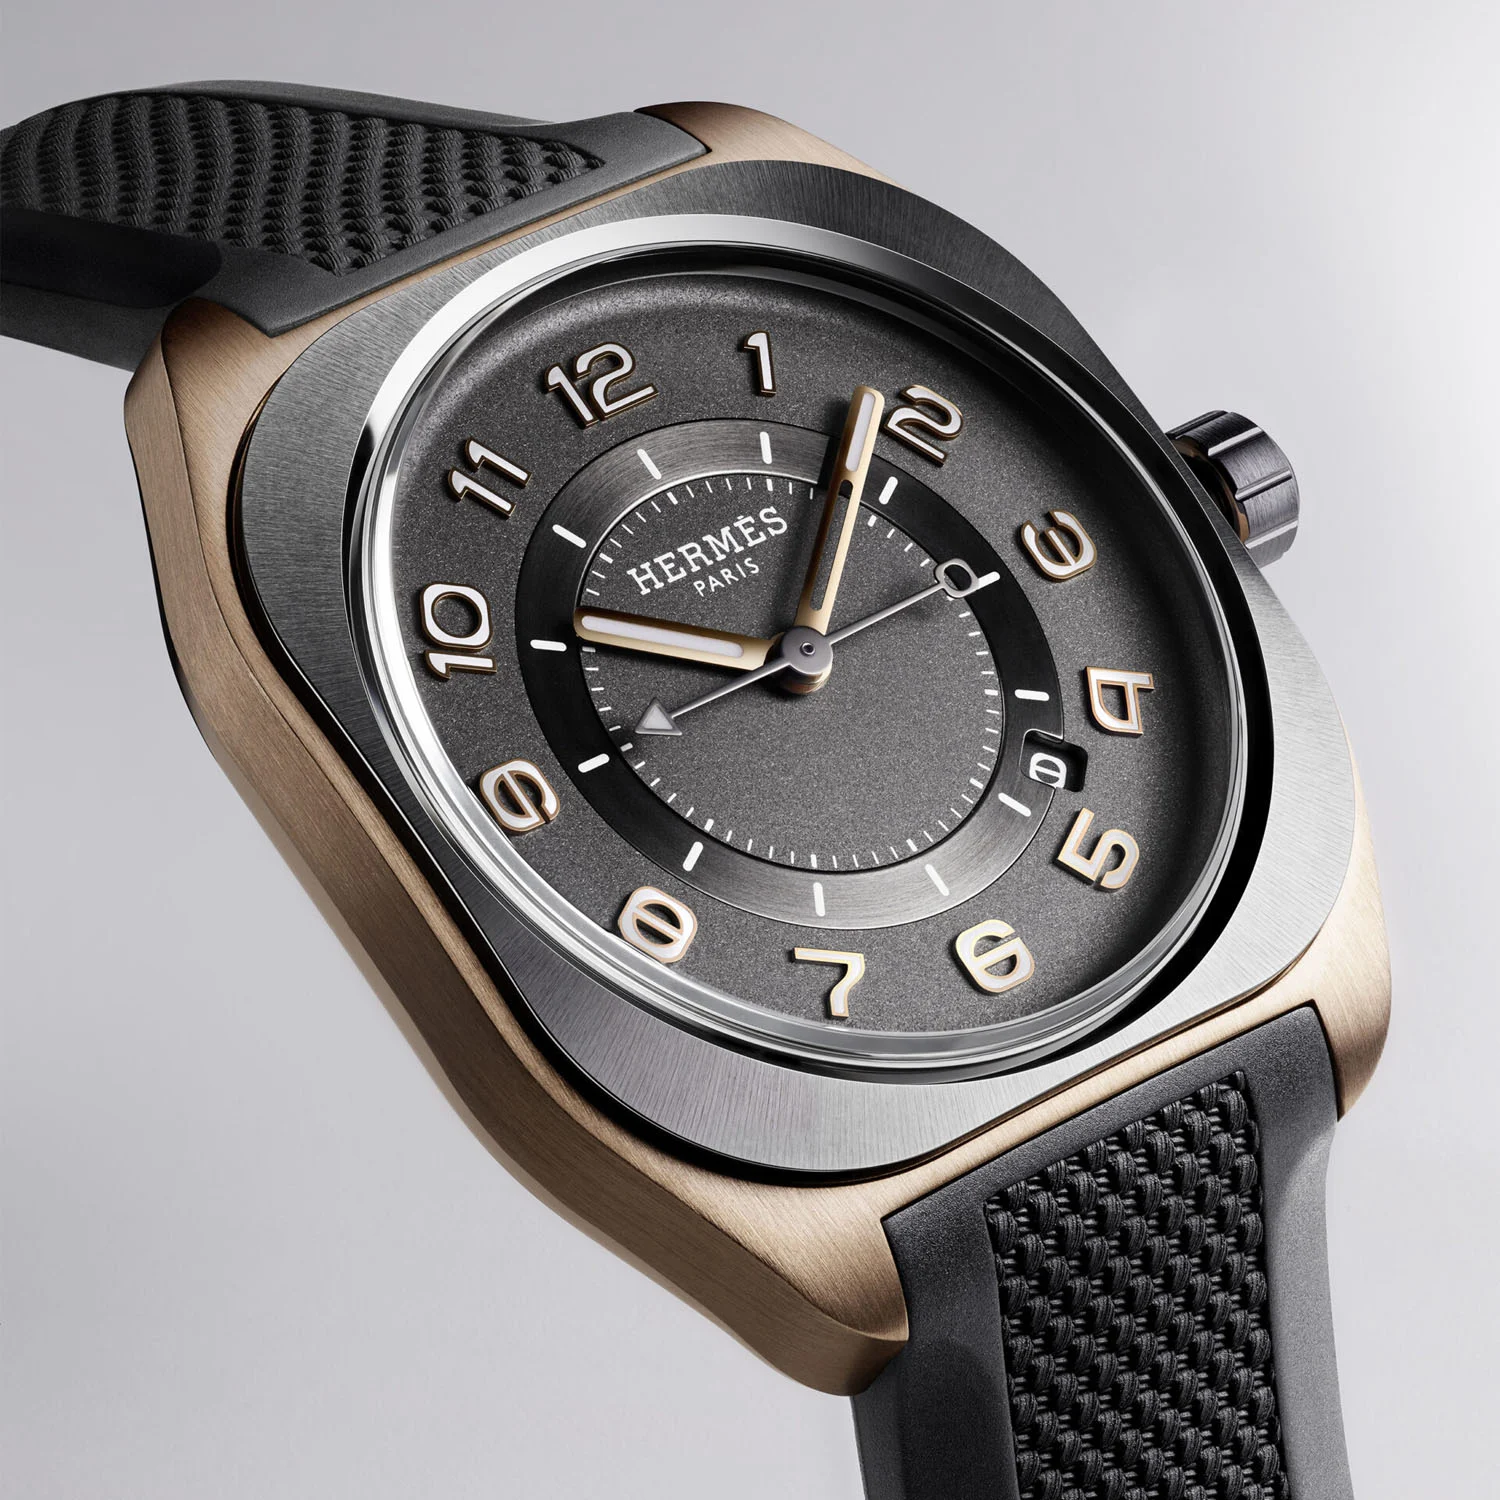 INTRODUCING: The new Hermès H08 in rose gold, titanium and ceramic offers a refreshing take on sporty chic